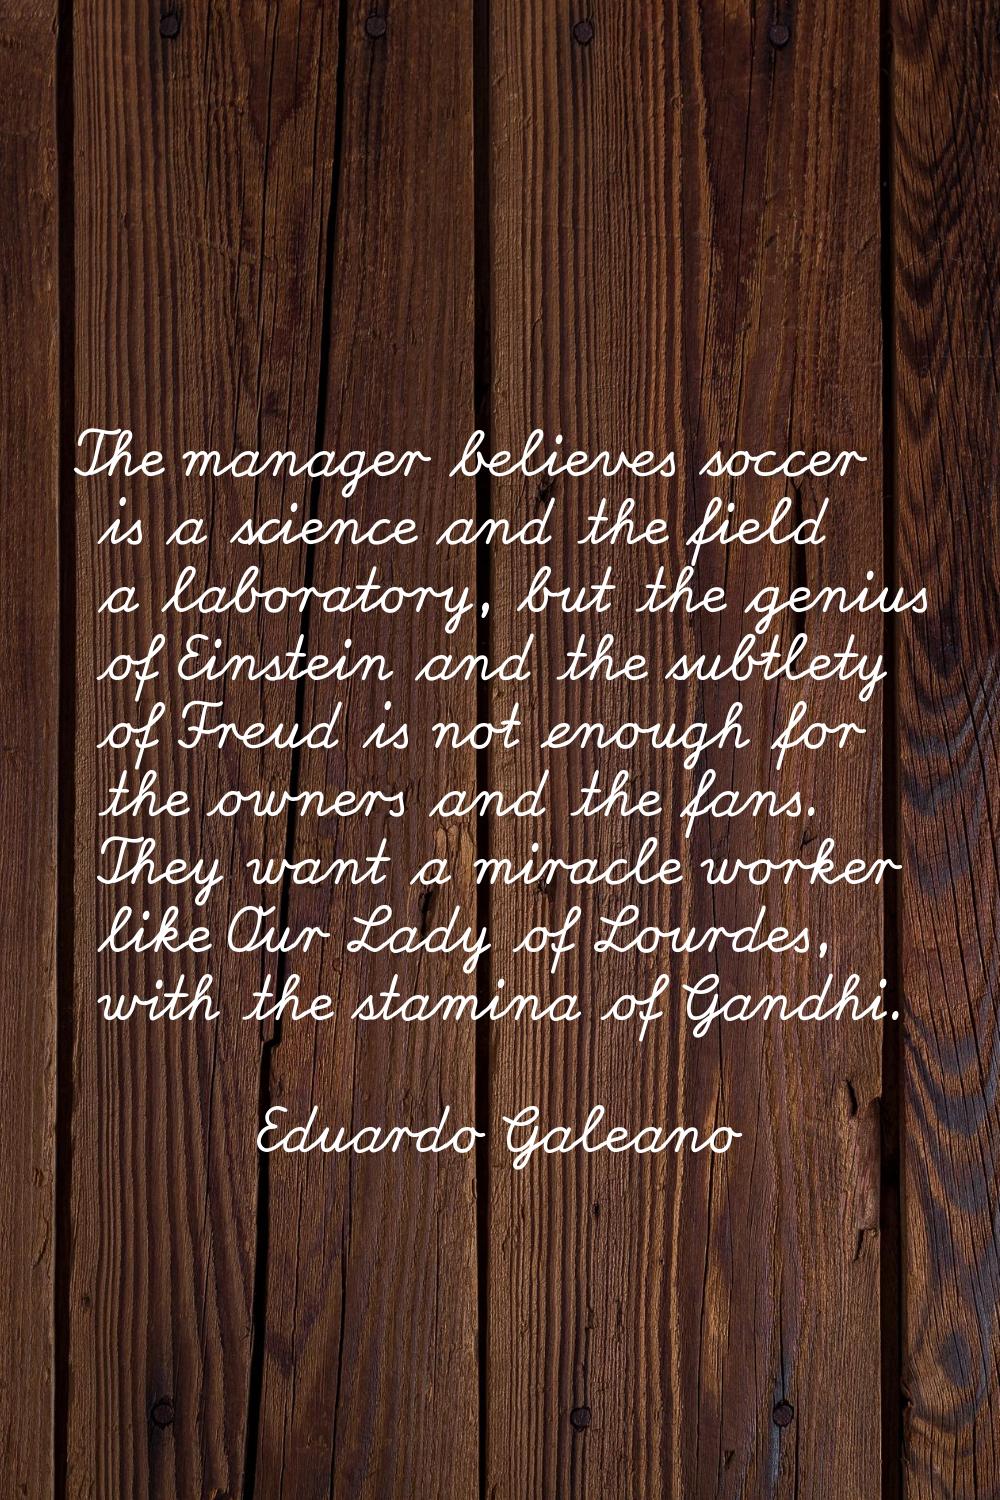 The manager believes soccer is a science and the field a laboratory, but the genius of Einstein and